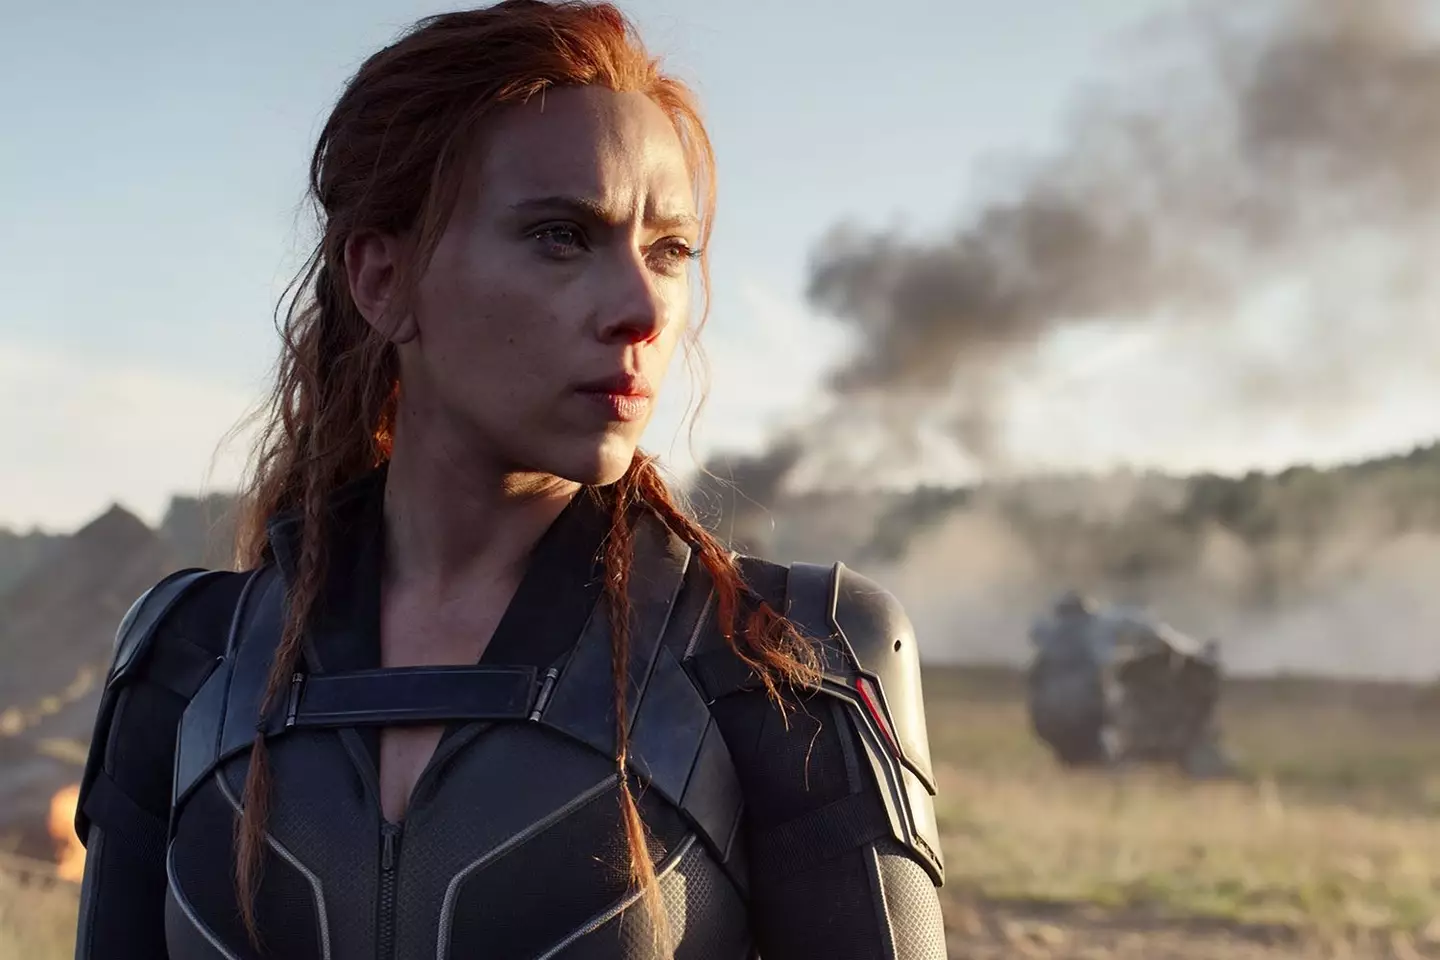 The Black Widow star won't be making a return to the franchise.